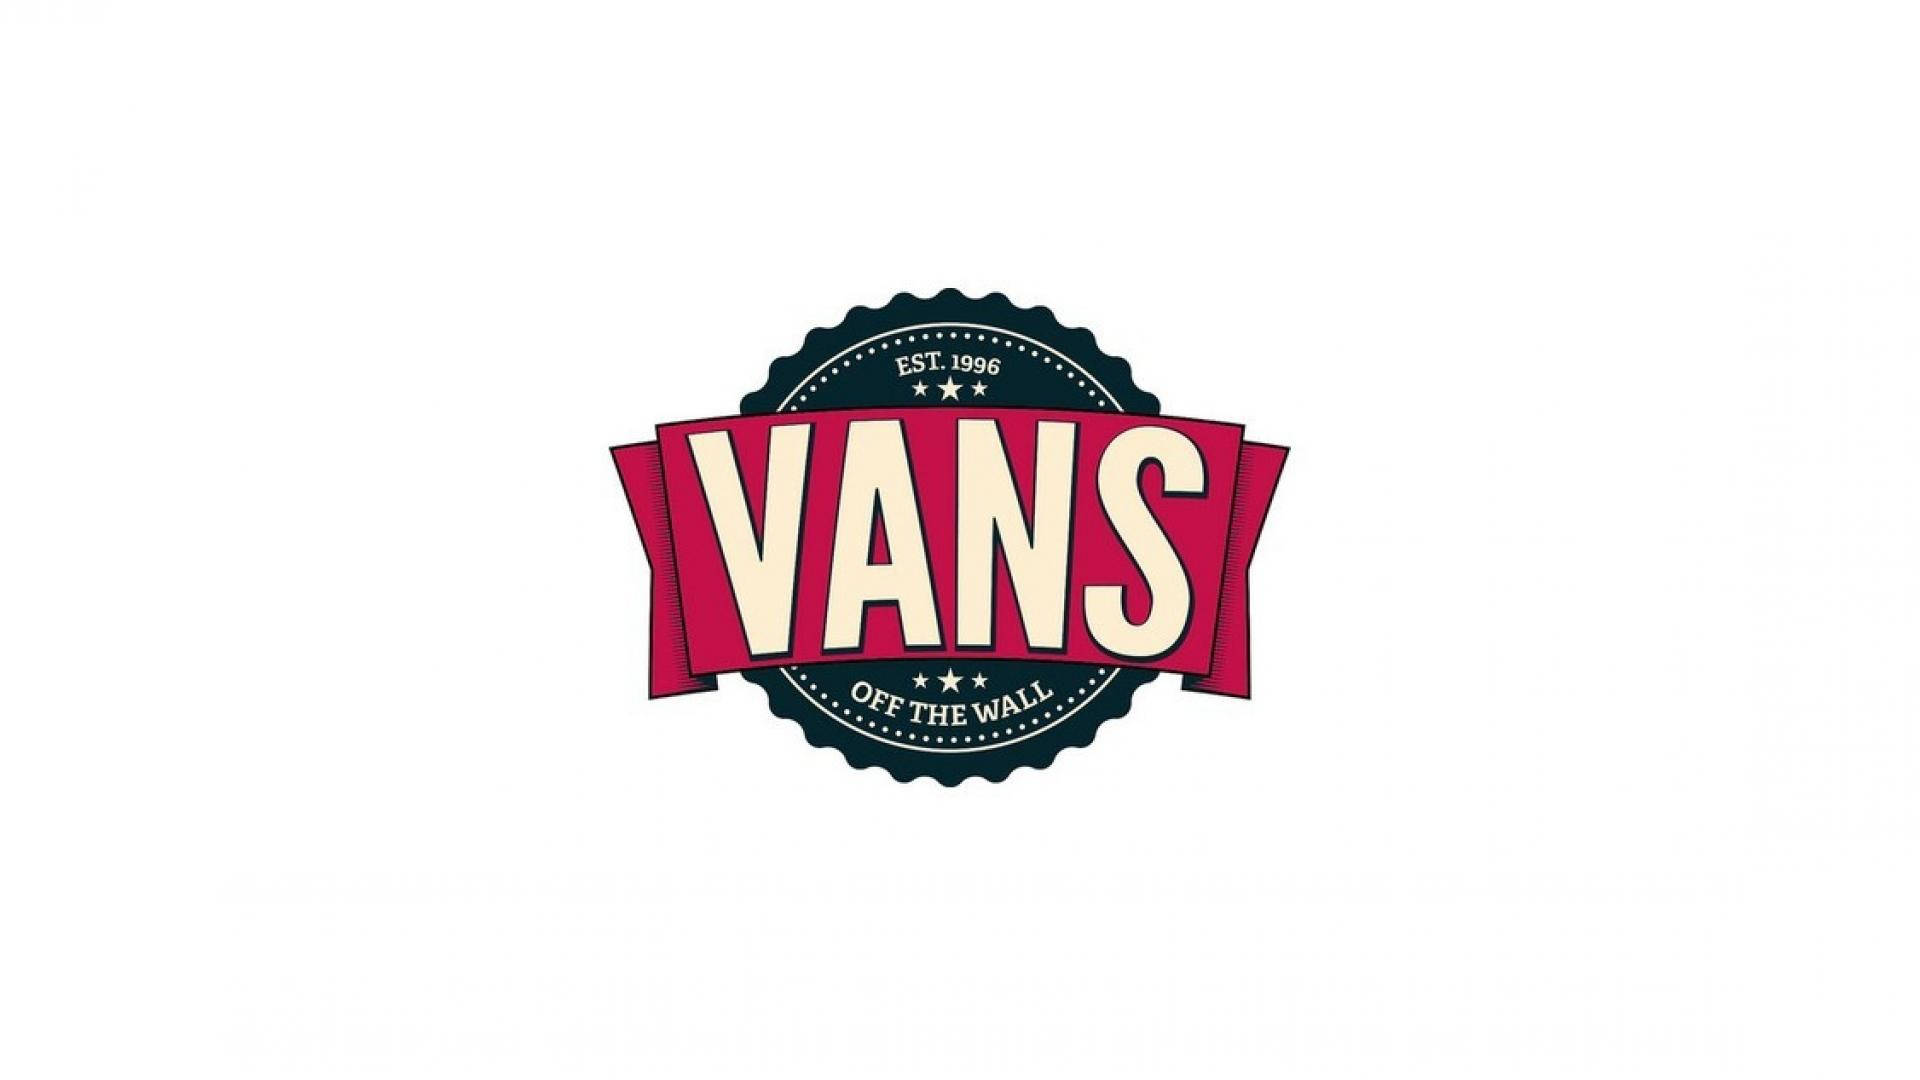 Vans Off The Wall Stamp